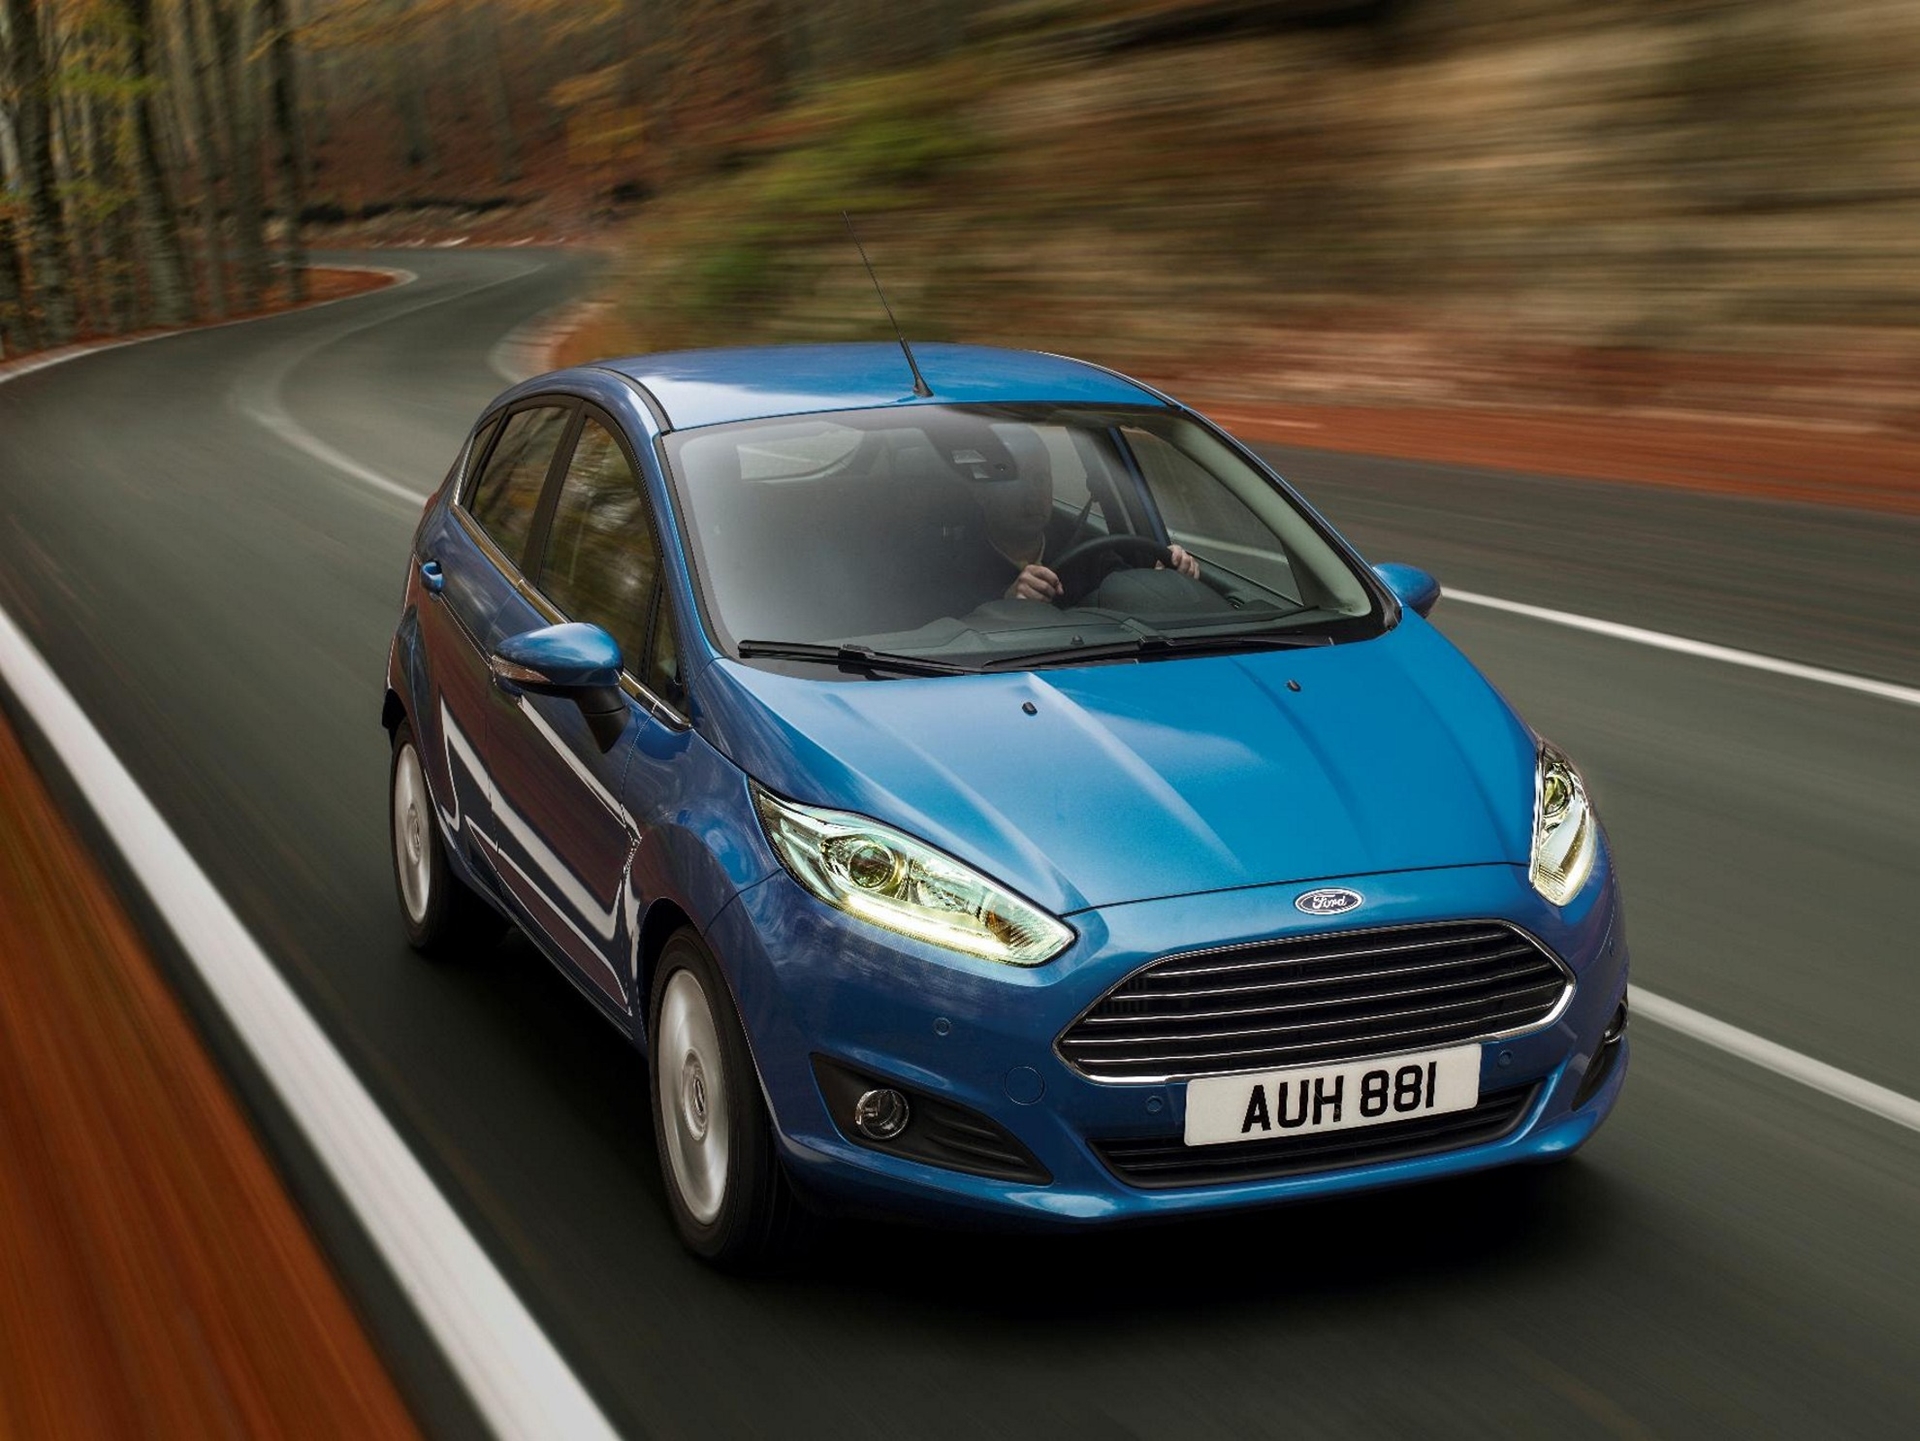 FORD FIESTA IS BEST USED CAR AS WELL AS TOP-SELLING NEW MODEL